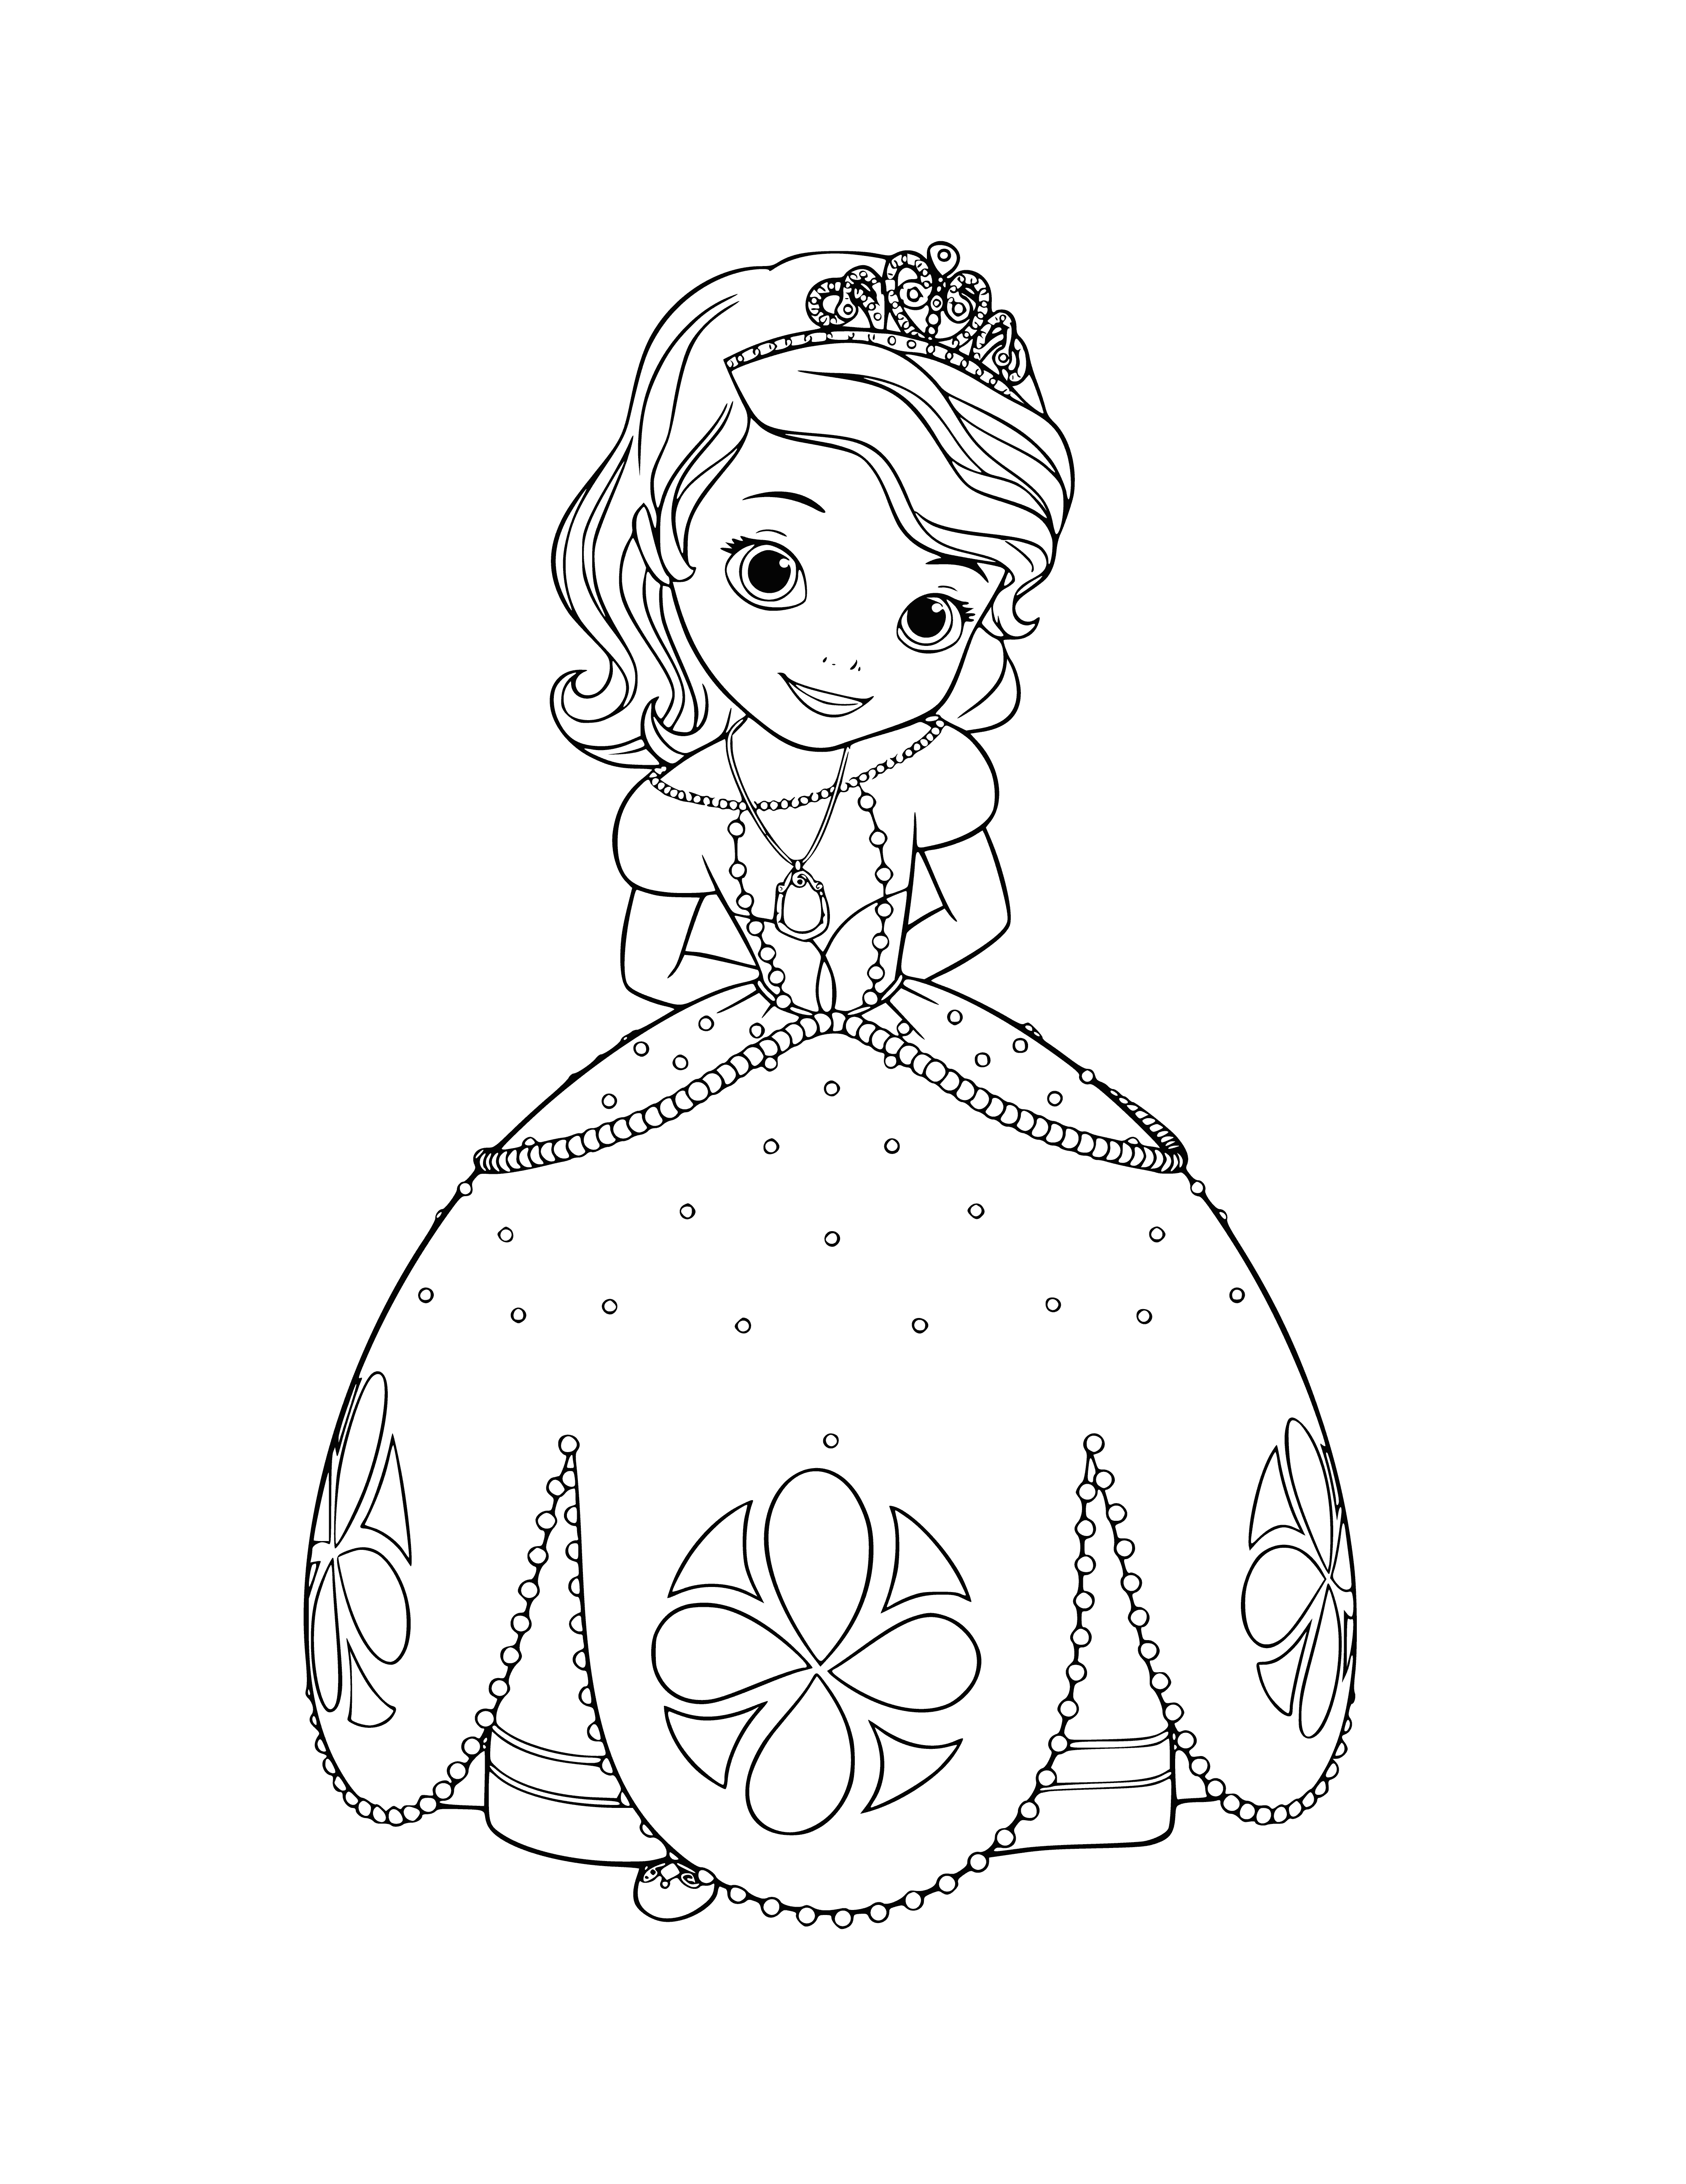 coloring page: Sofia sits in a princess chair in a purple dress, crown on her head, reading a book while having a tea set before her.